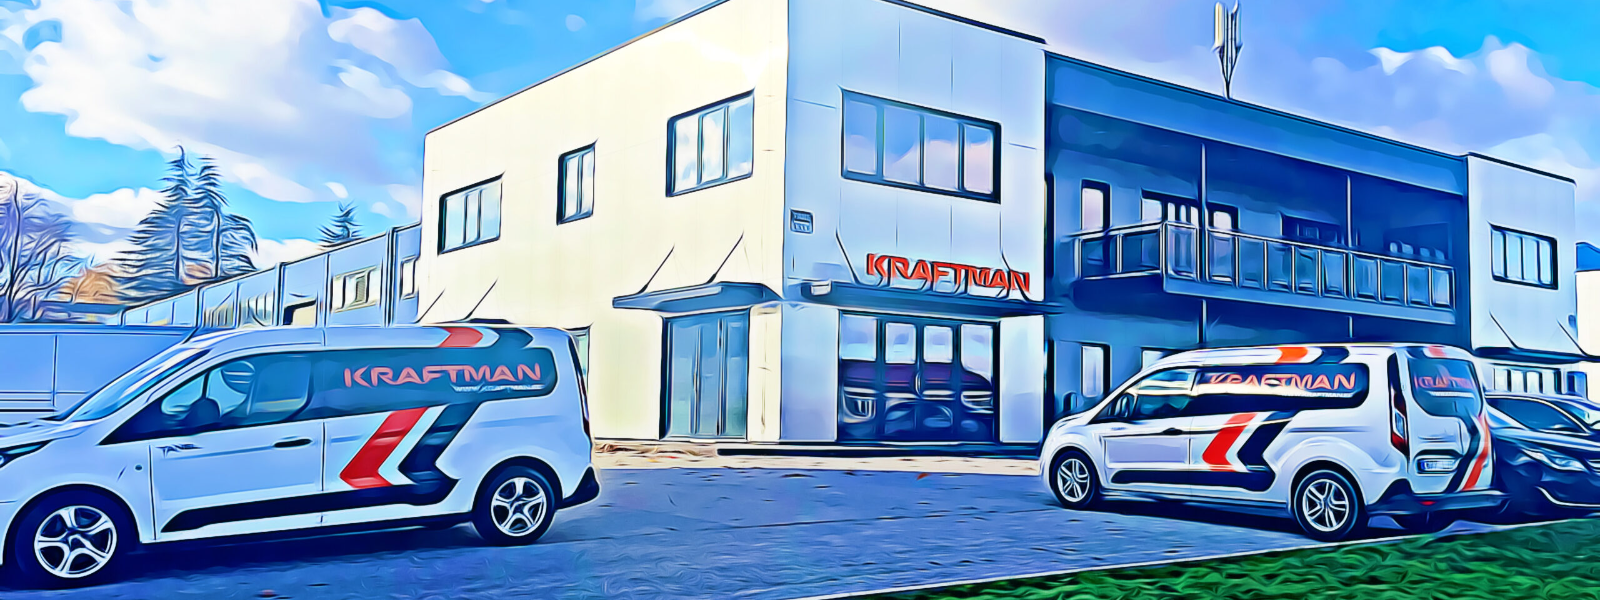 KRAFTMAN OÜ - construction services, use of space, complex projects, high quality result, for the private, the company, t...